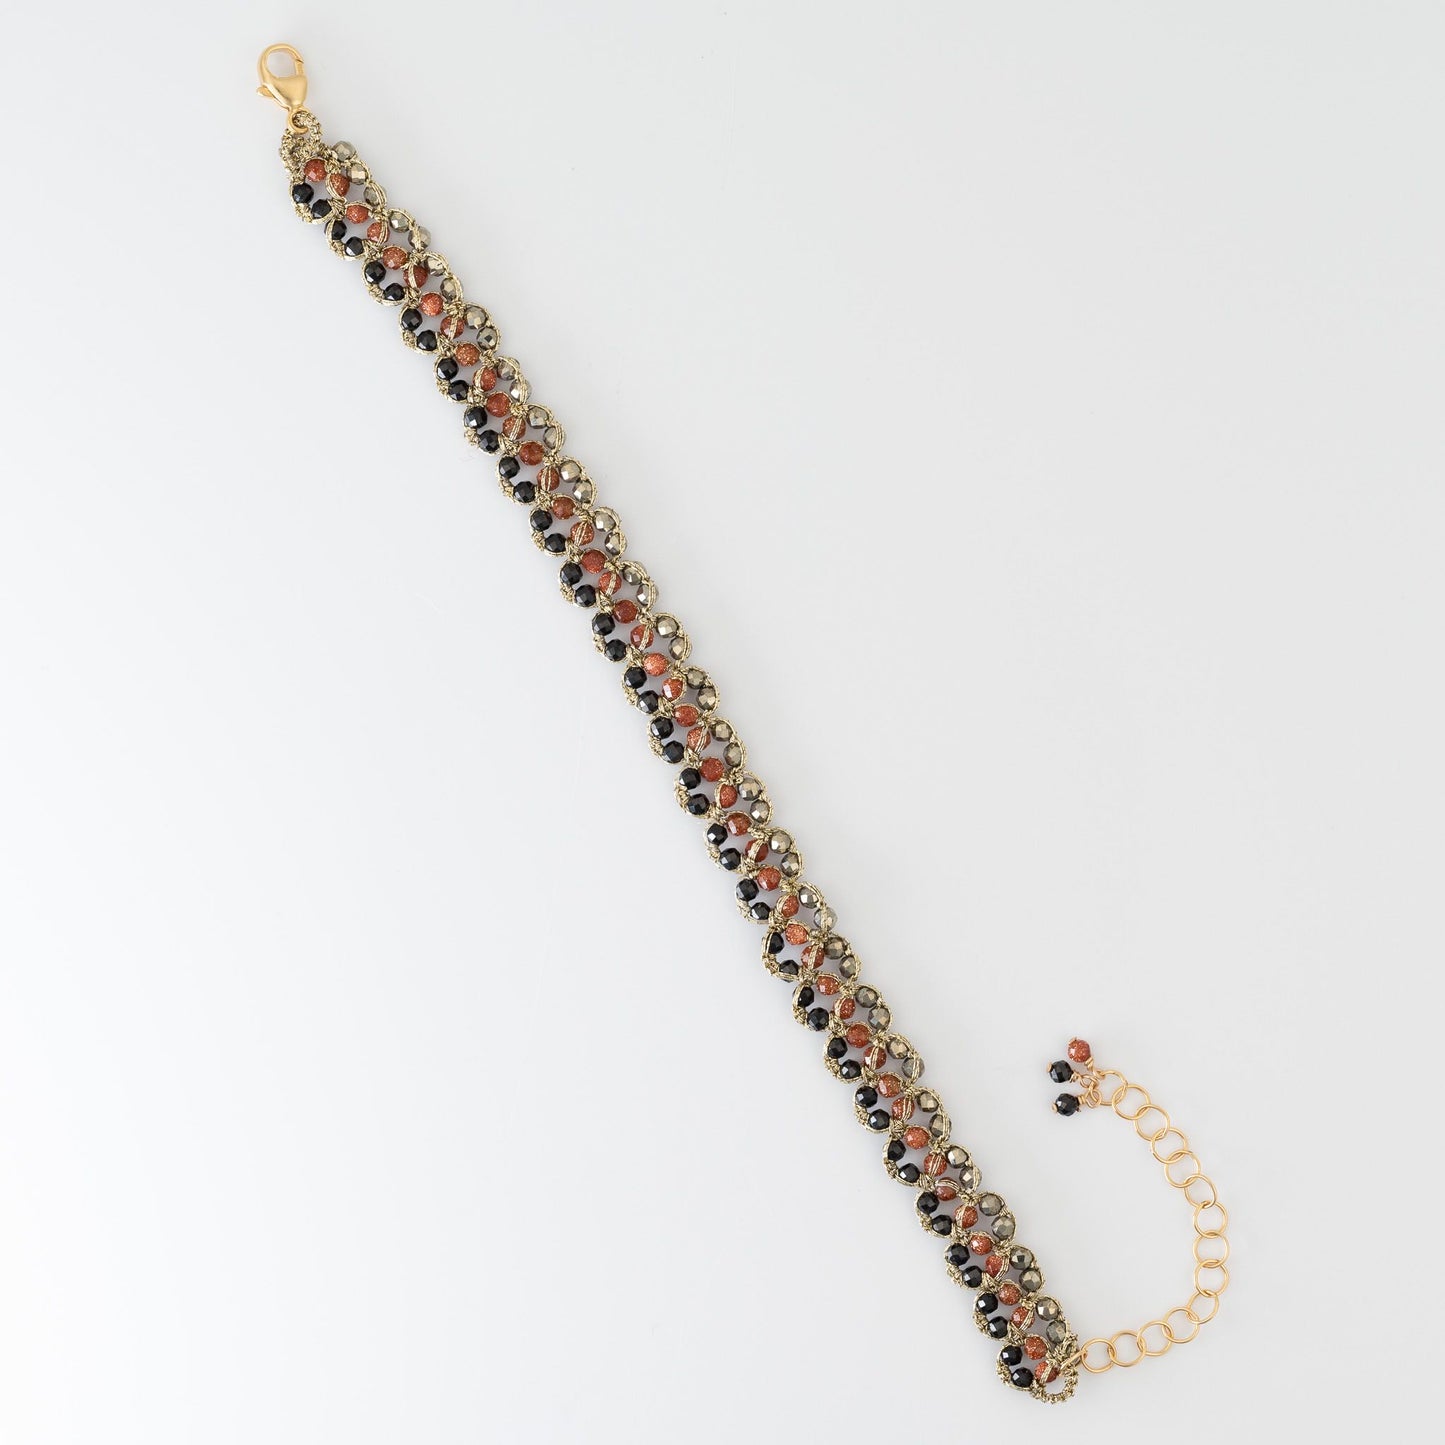 Load image into Gallery viewer, Woven Pyrite, Spinel and Sunstone Lace Bracelet
